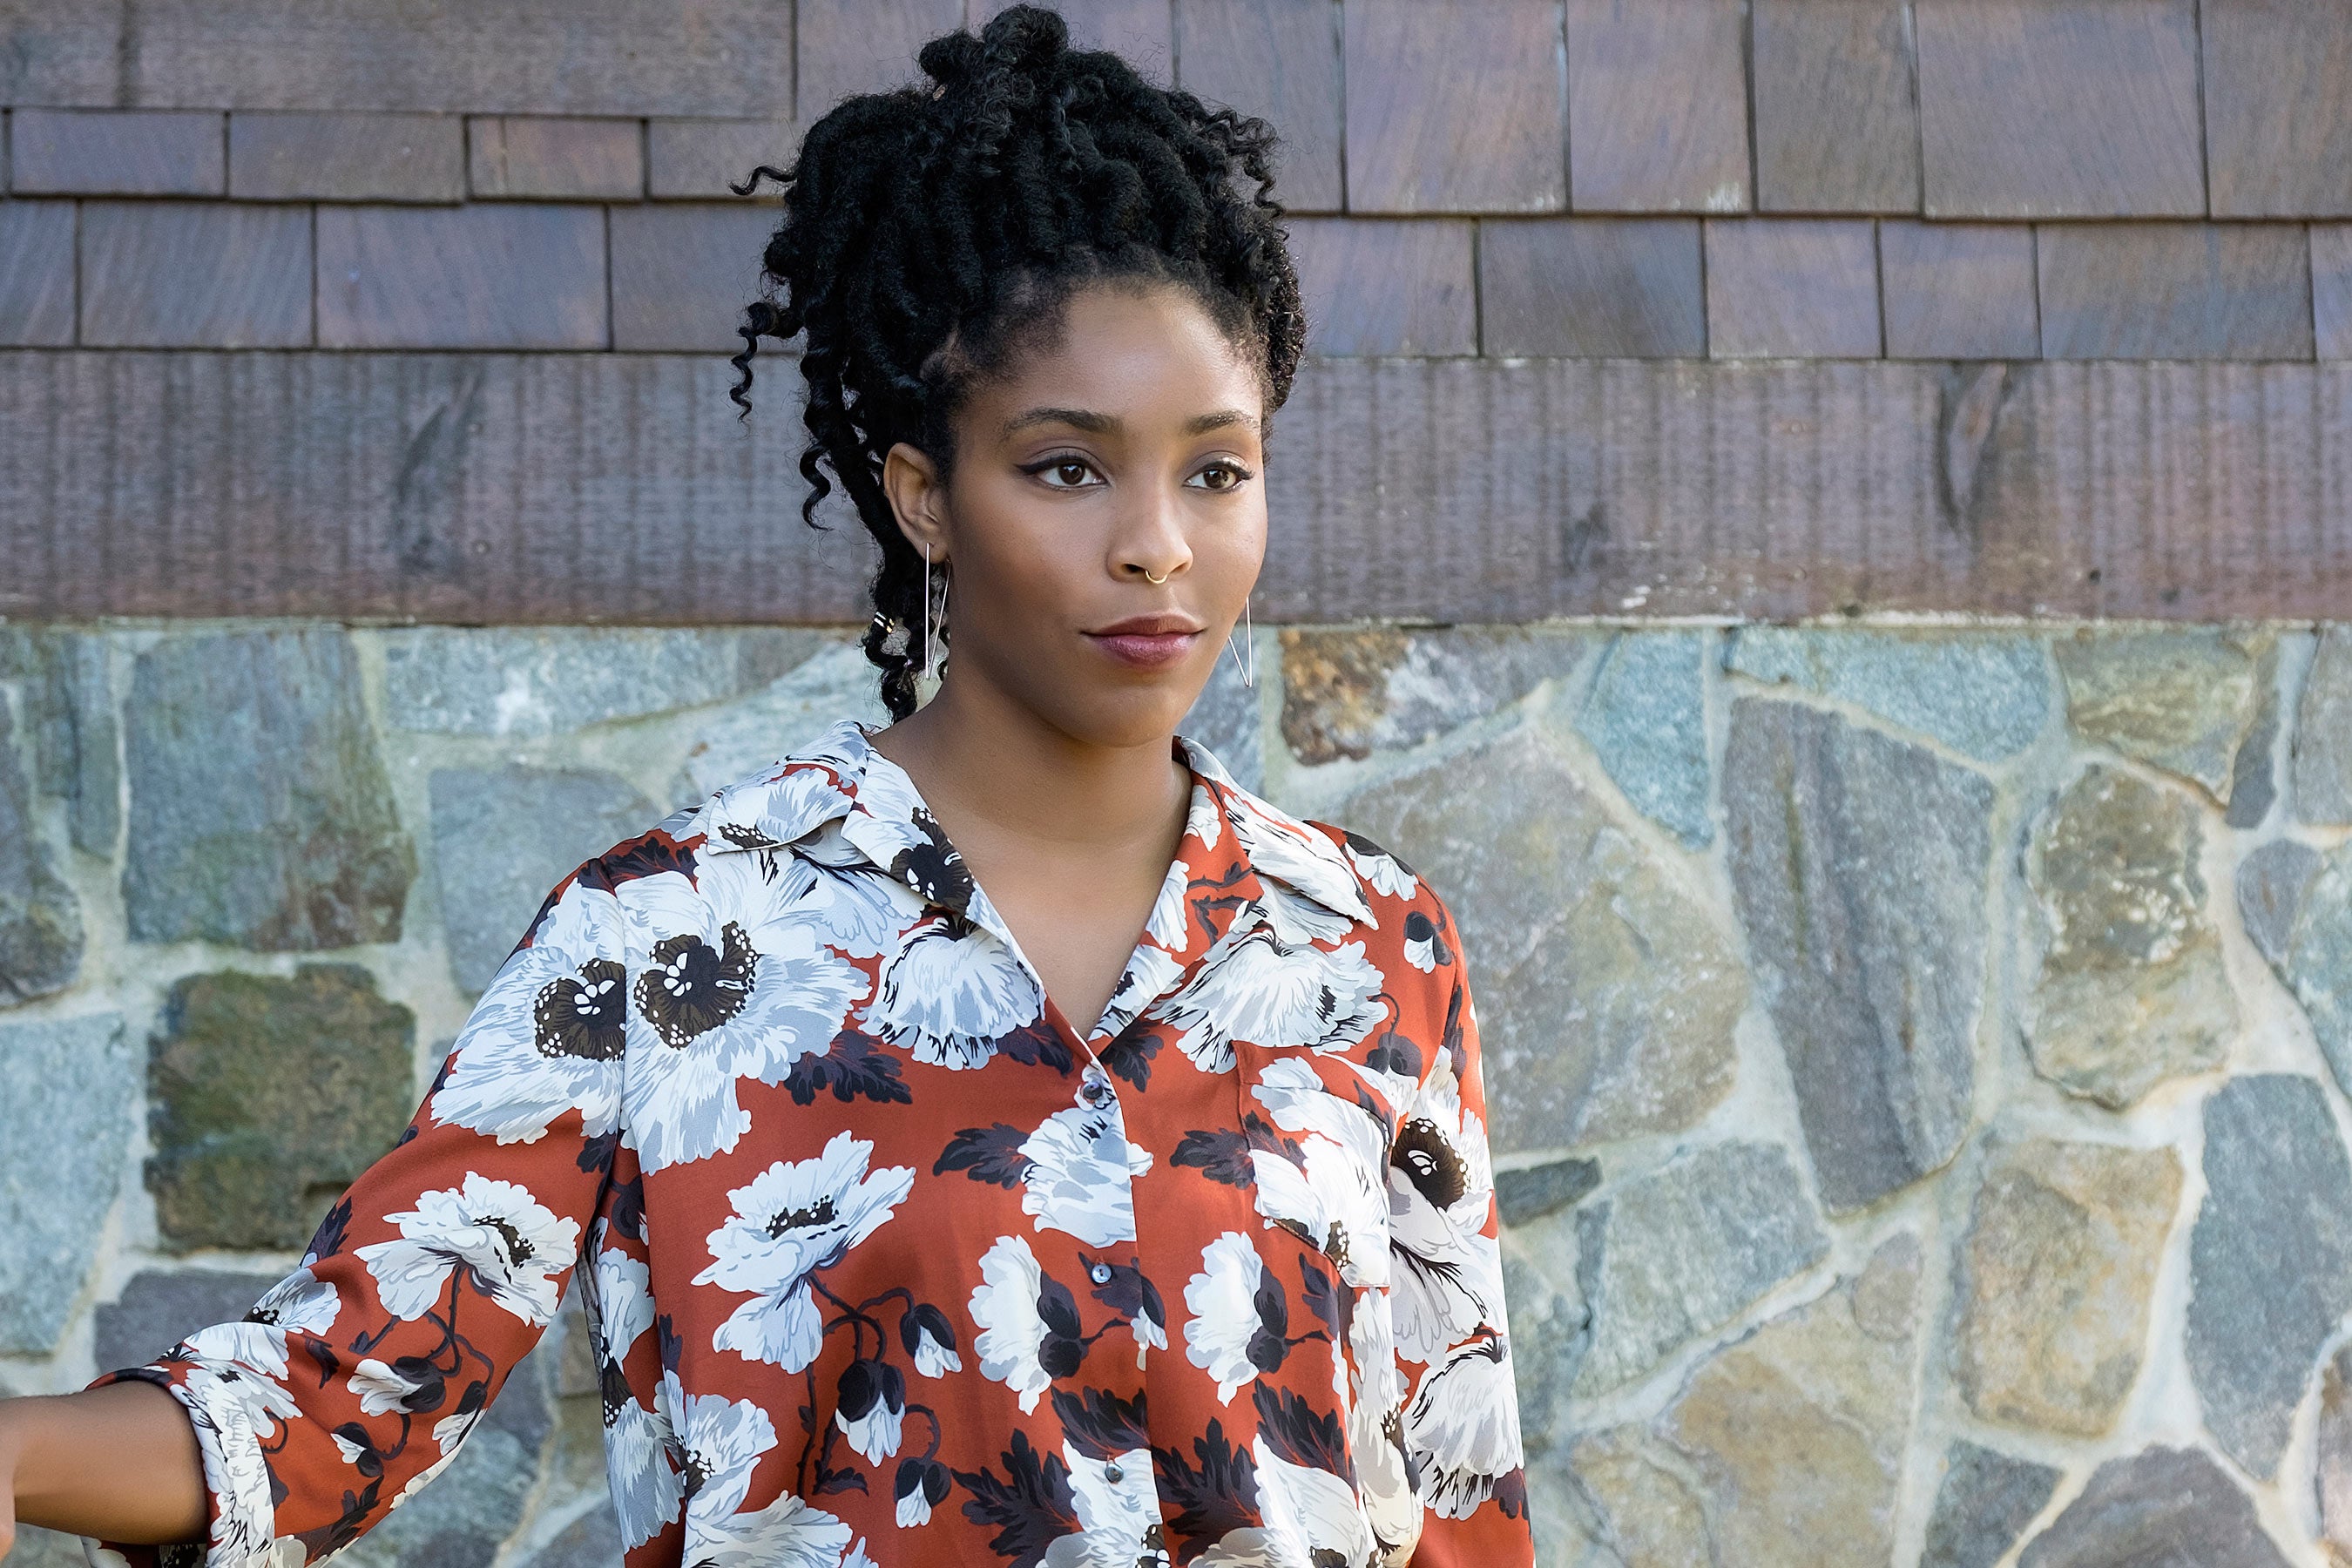 Jessica Williams Dances Her Way Through 'The Incredible Jessica James' Trailer
